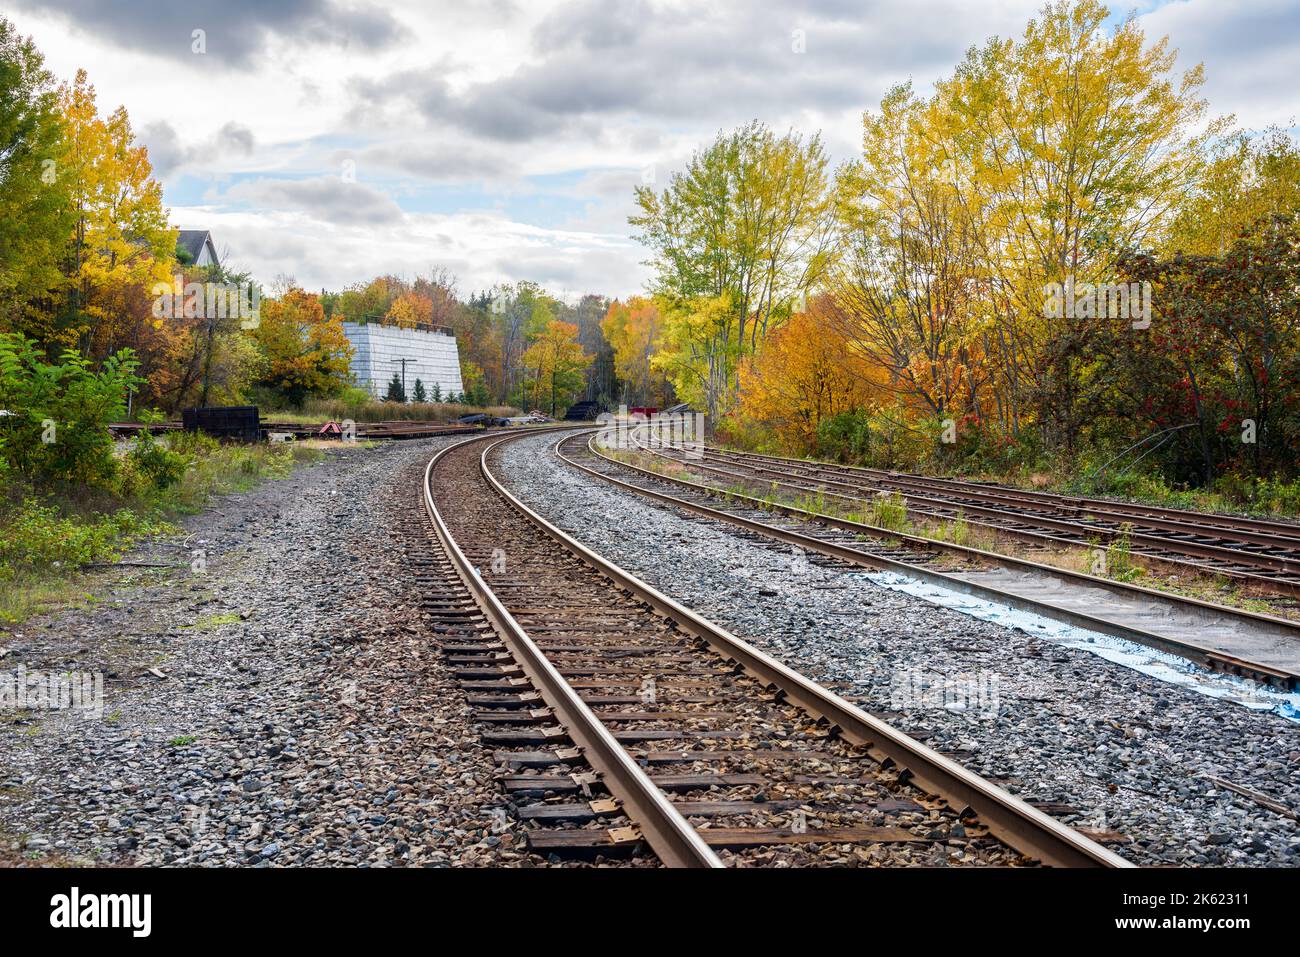 Multiple railroad tracks with switches on a cloudy autumn day. Colourful autunalm trees line the tracks. Stock Photo